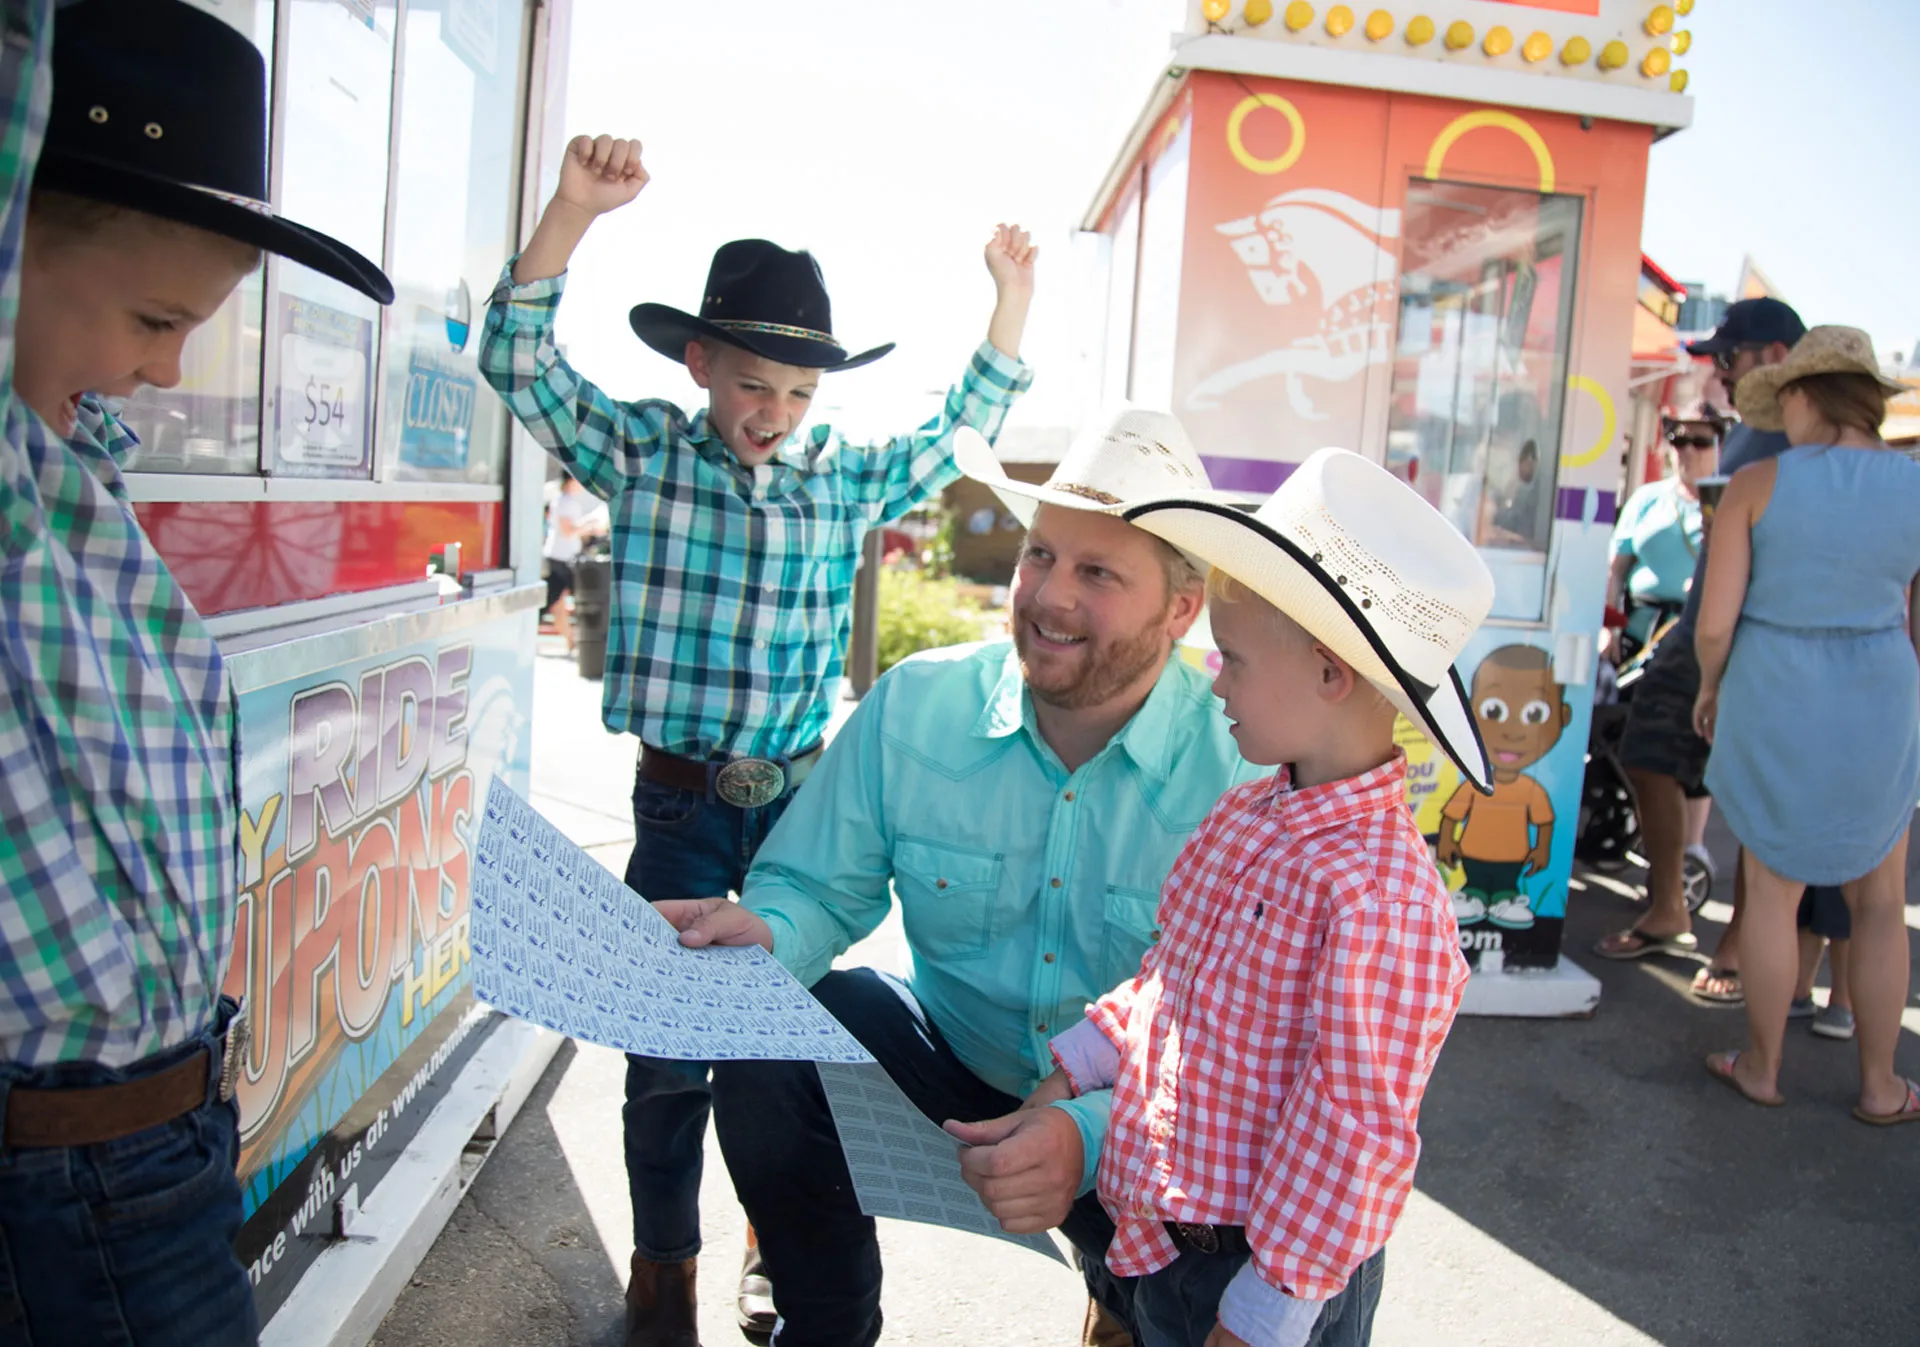 Get tickets to the Calgary Stampede in advance (Photo credit: Calgary Stampede).